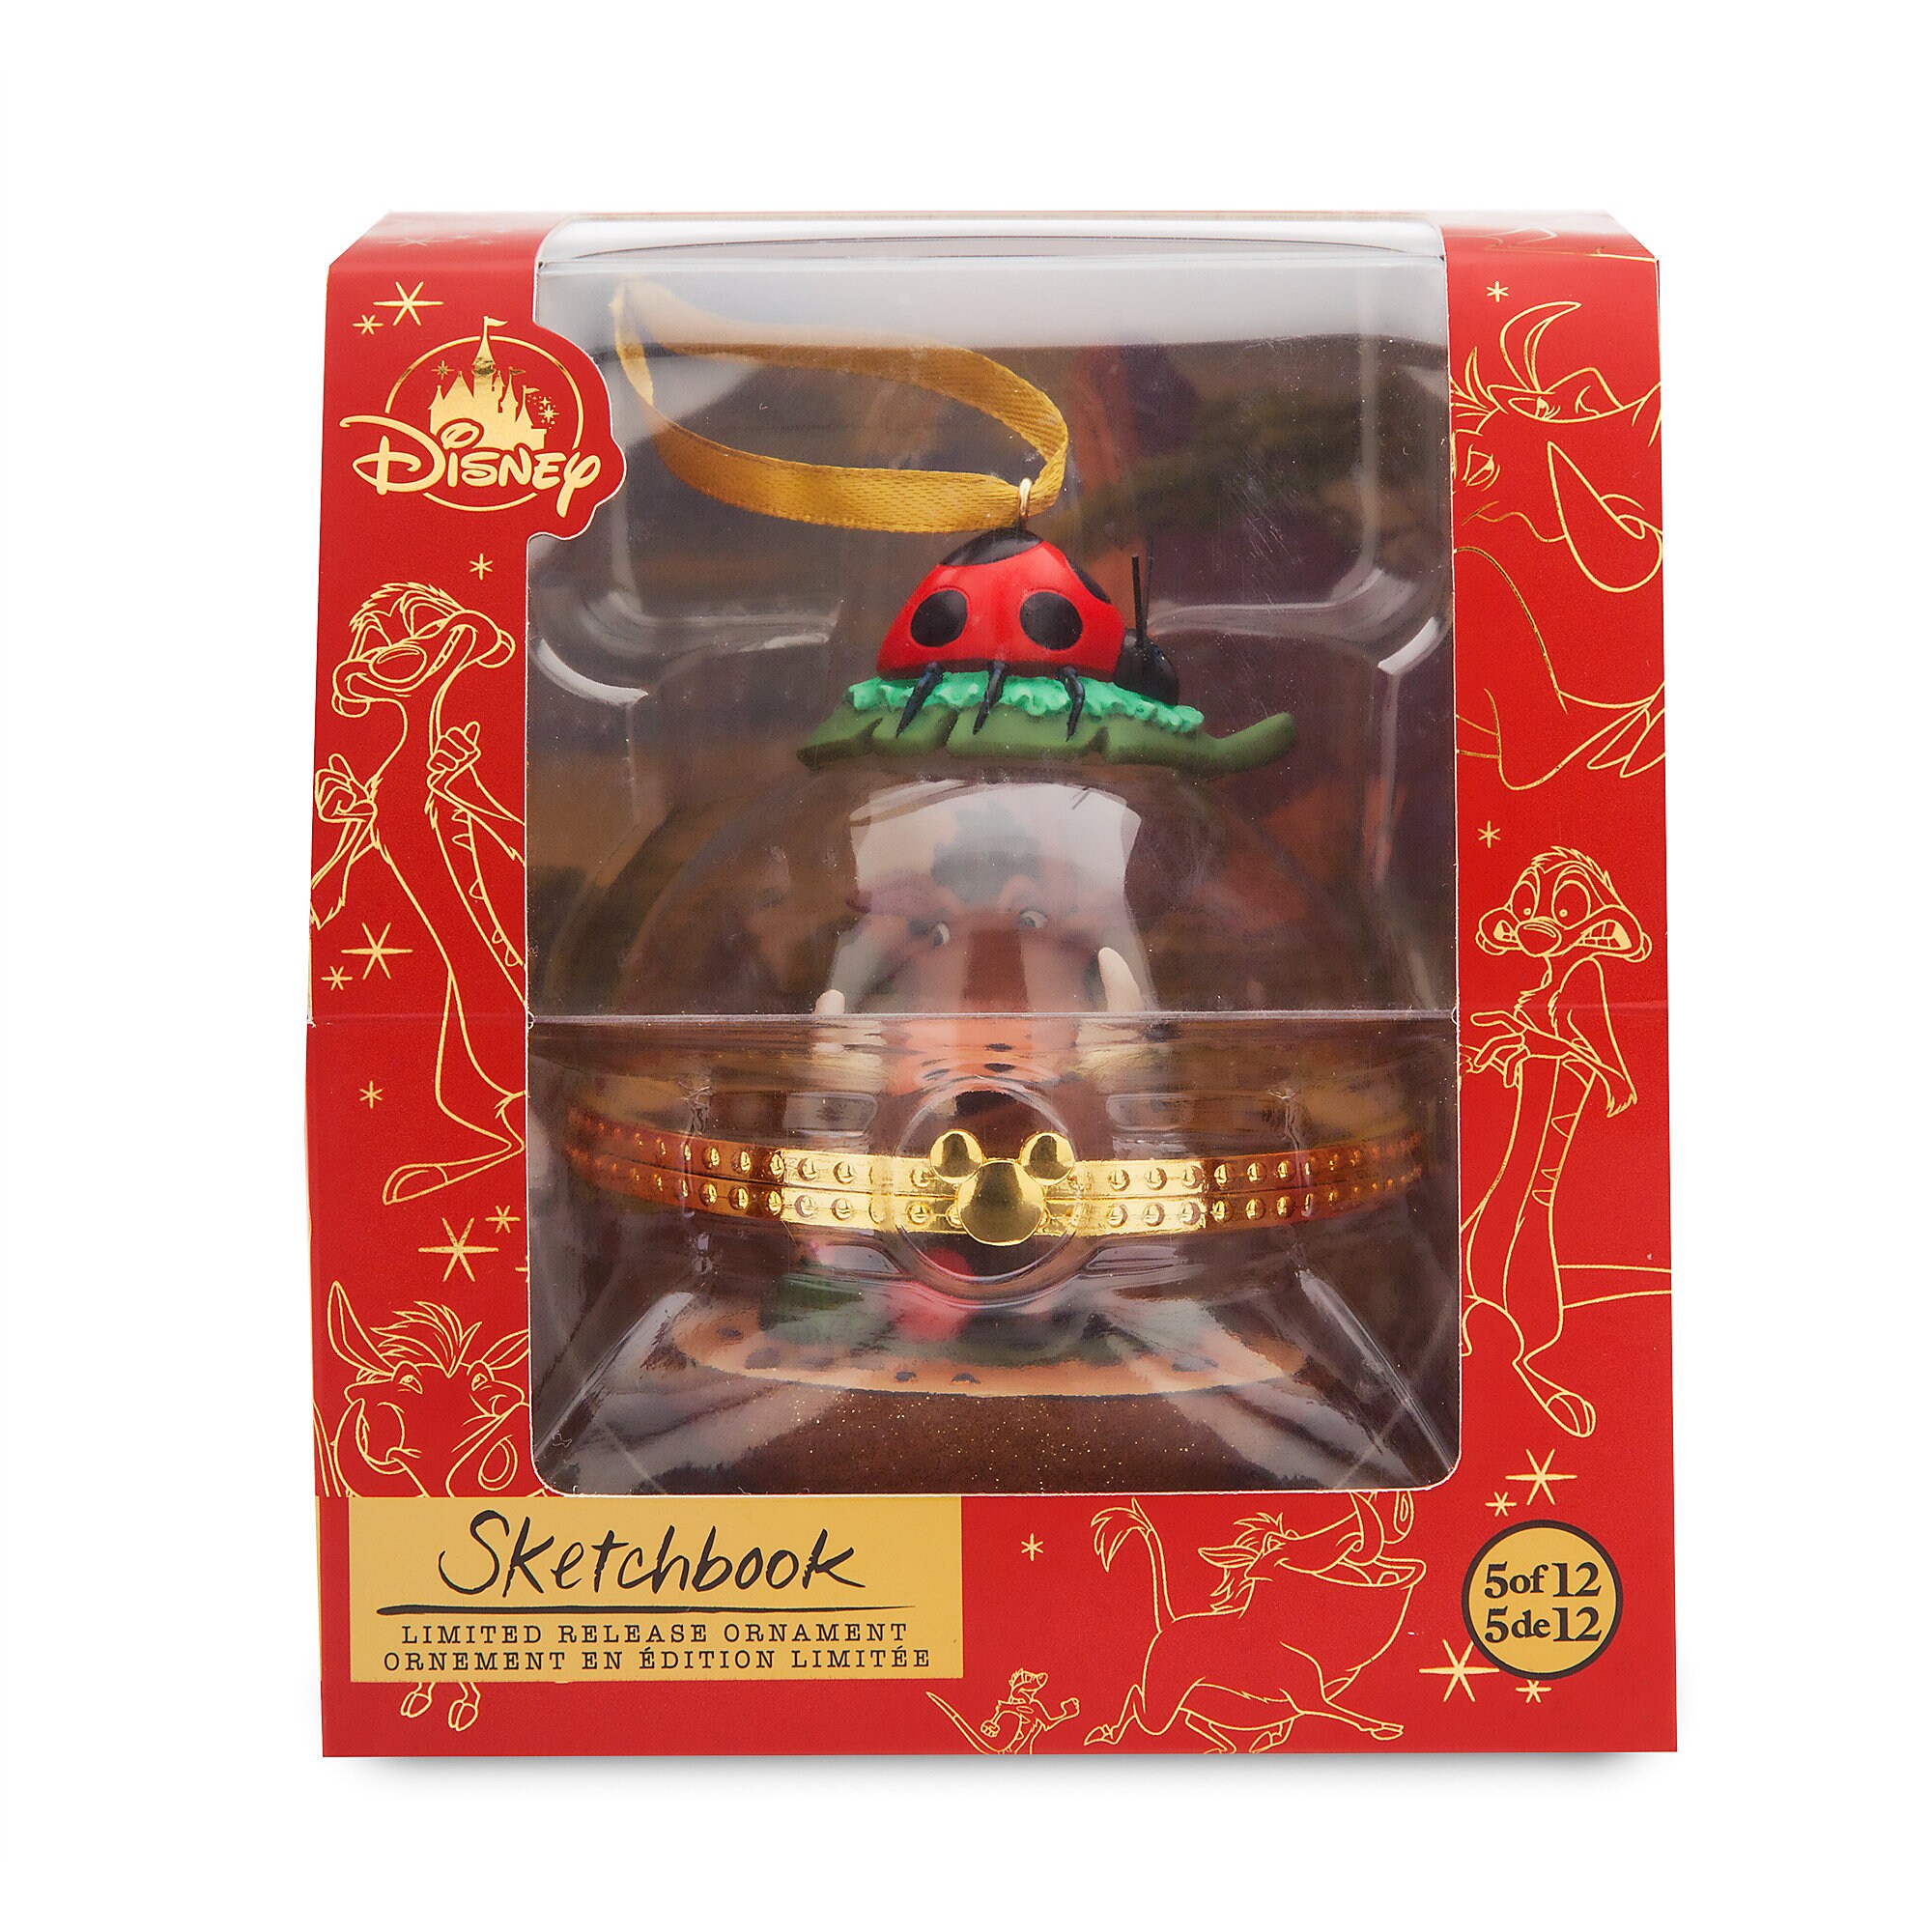 Timon and Pumbaa Disney Duos Sketchbook Ornament - The Lion King - May - Limited Release